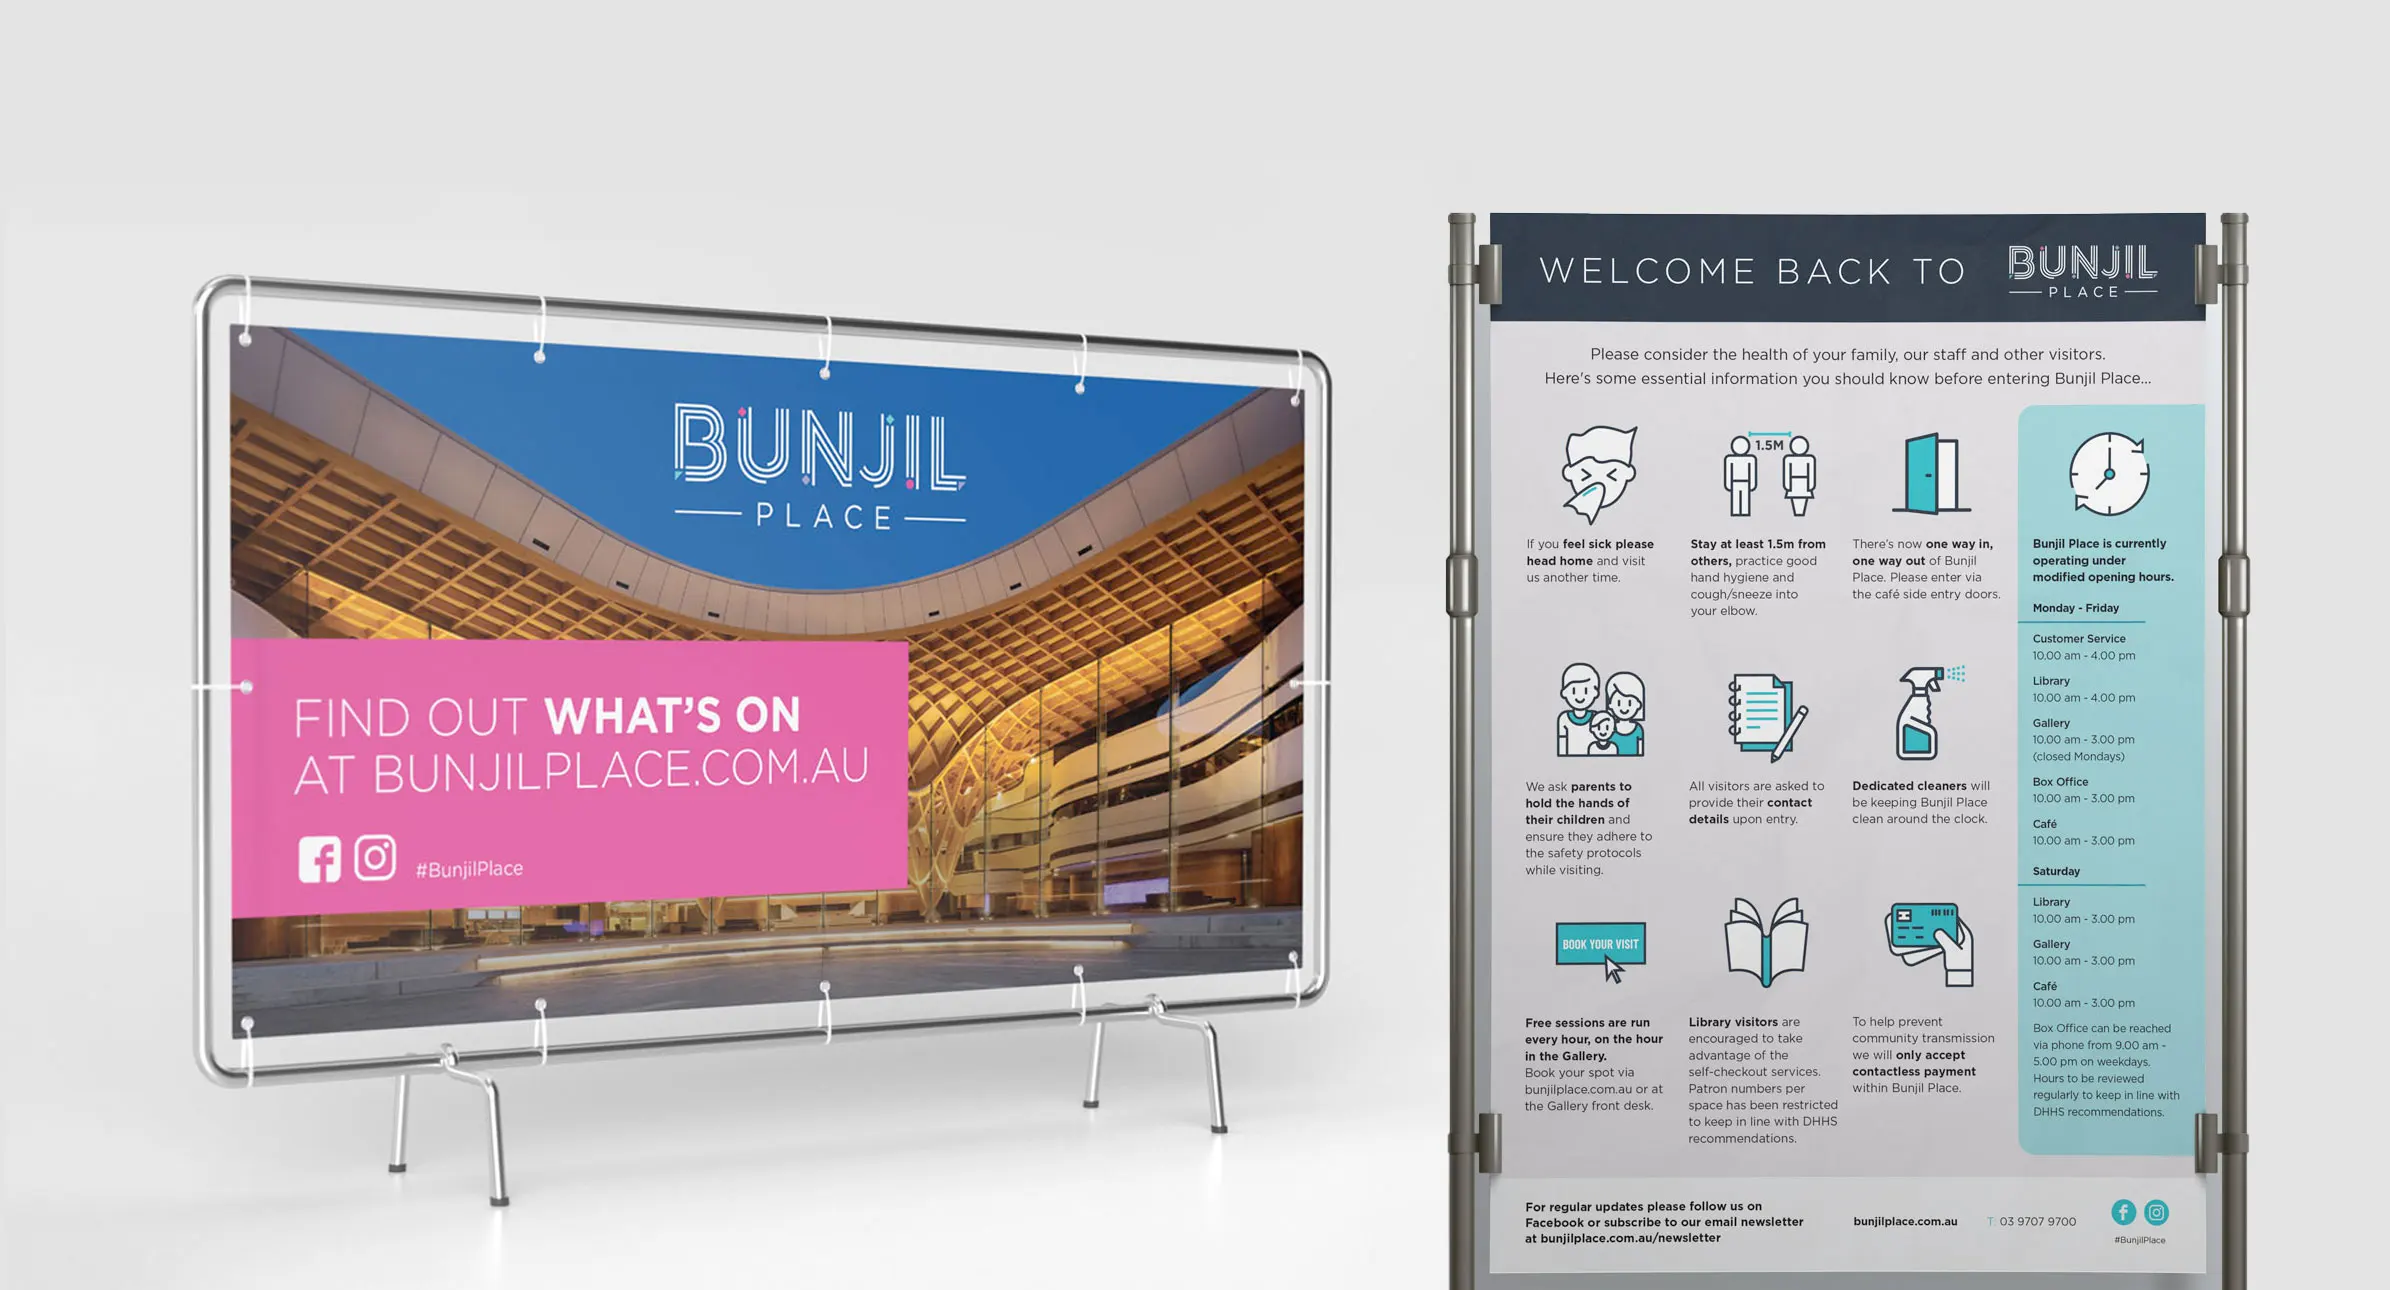 Zeemo are providing continuing professional services to Bunjil Place is in advertising